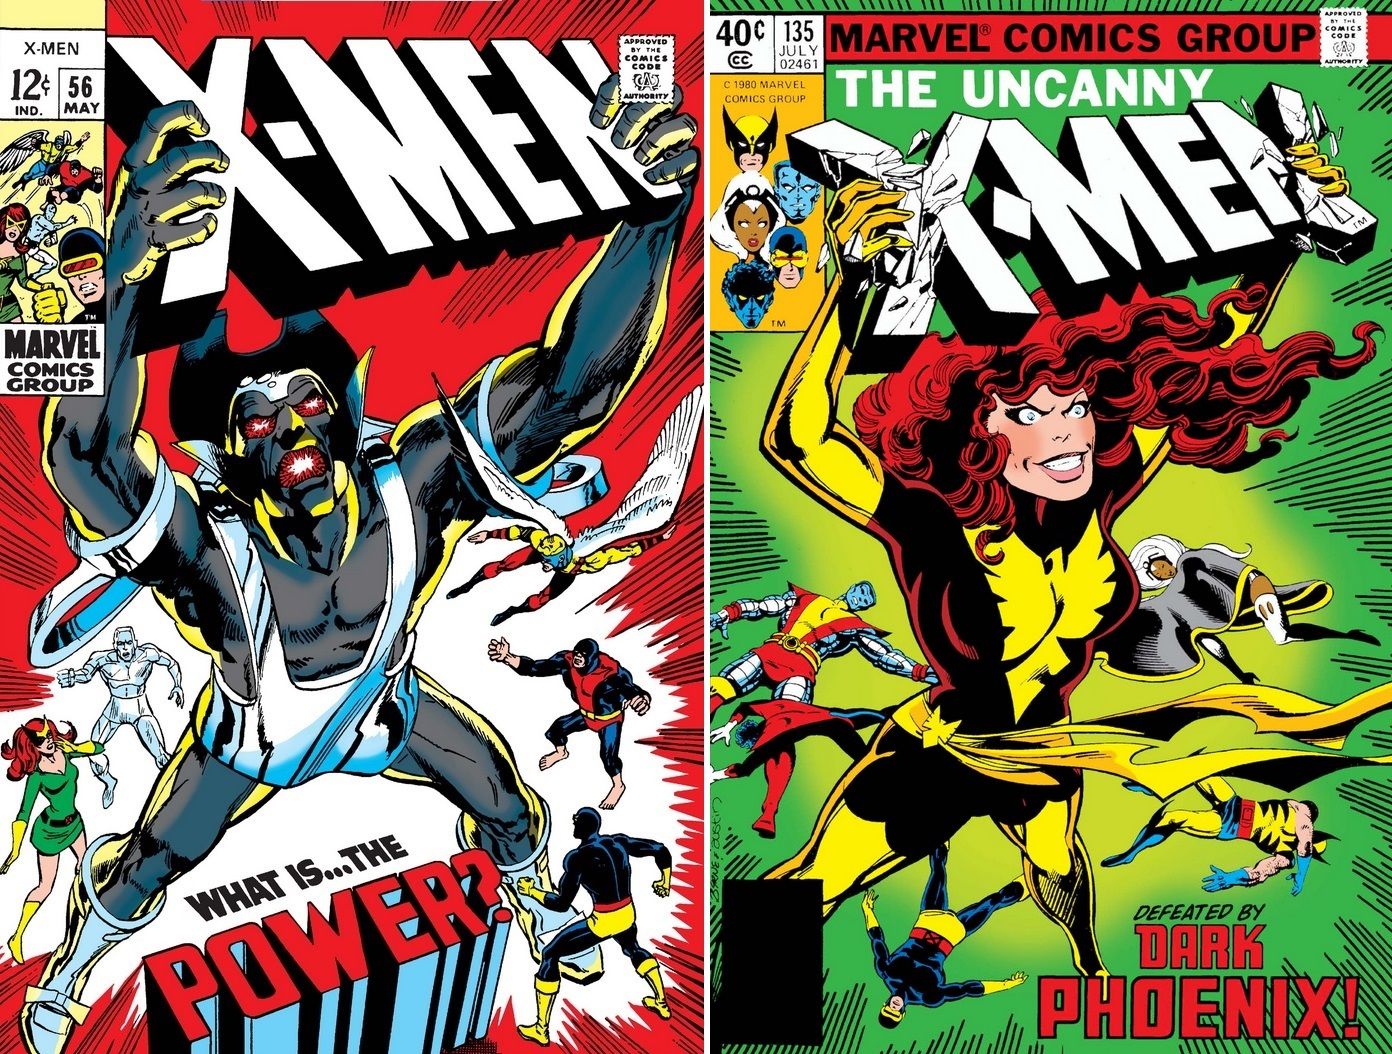 Side-by-side comparison of the covers of X-Men #56 and #135. They both feature one giant-sized character gripping the title while the X-Men either look on or lie unconscious.